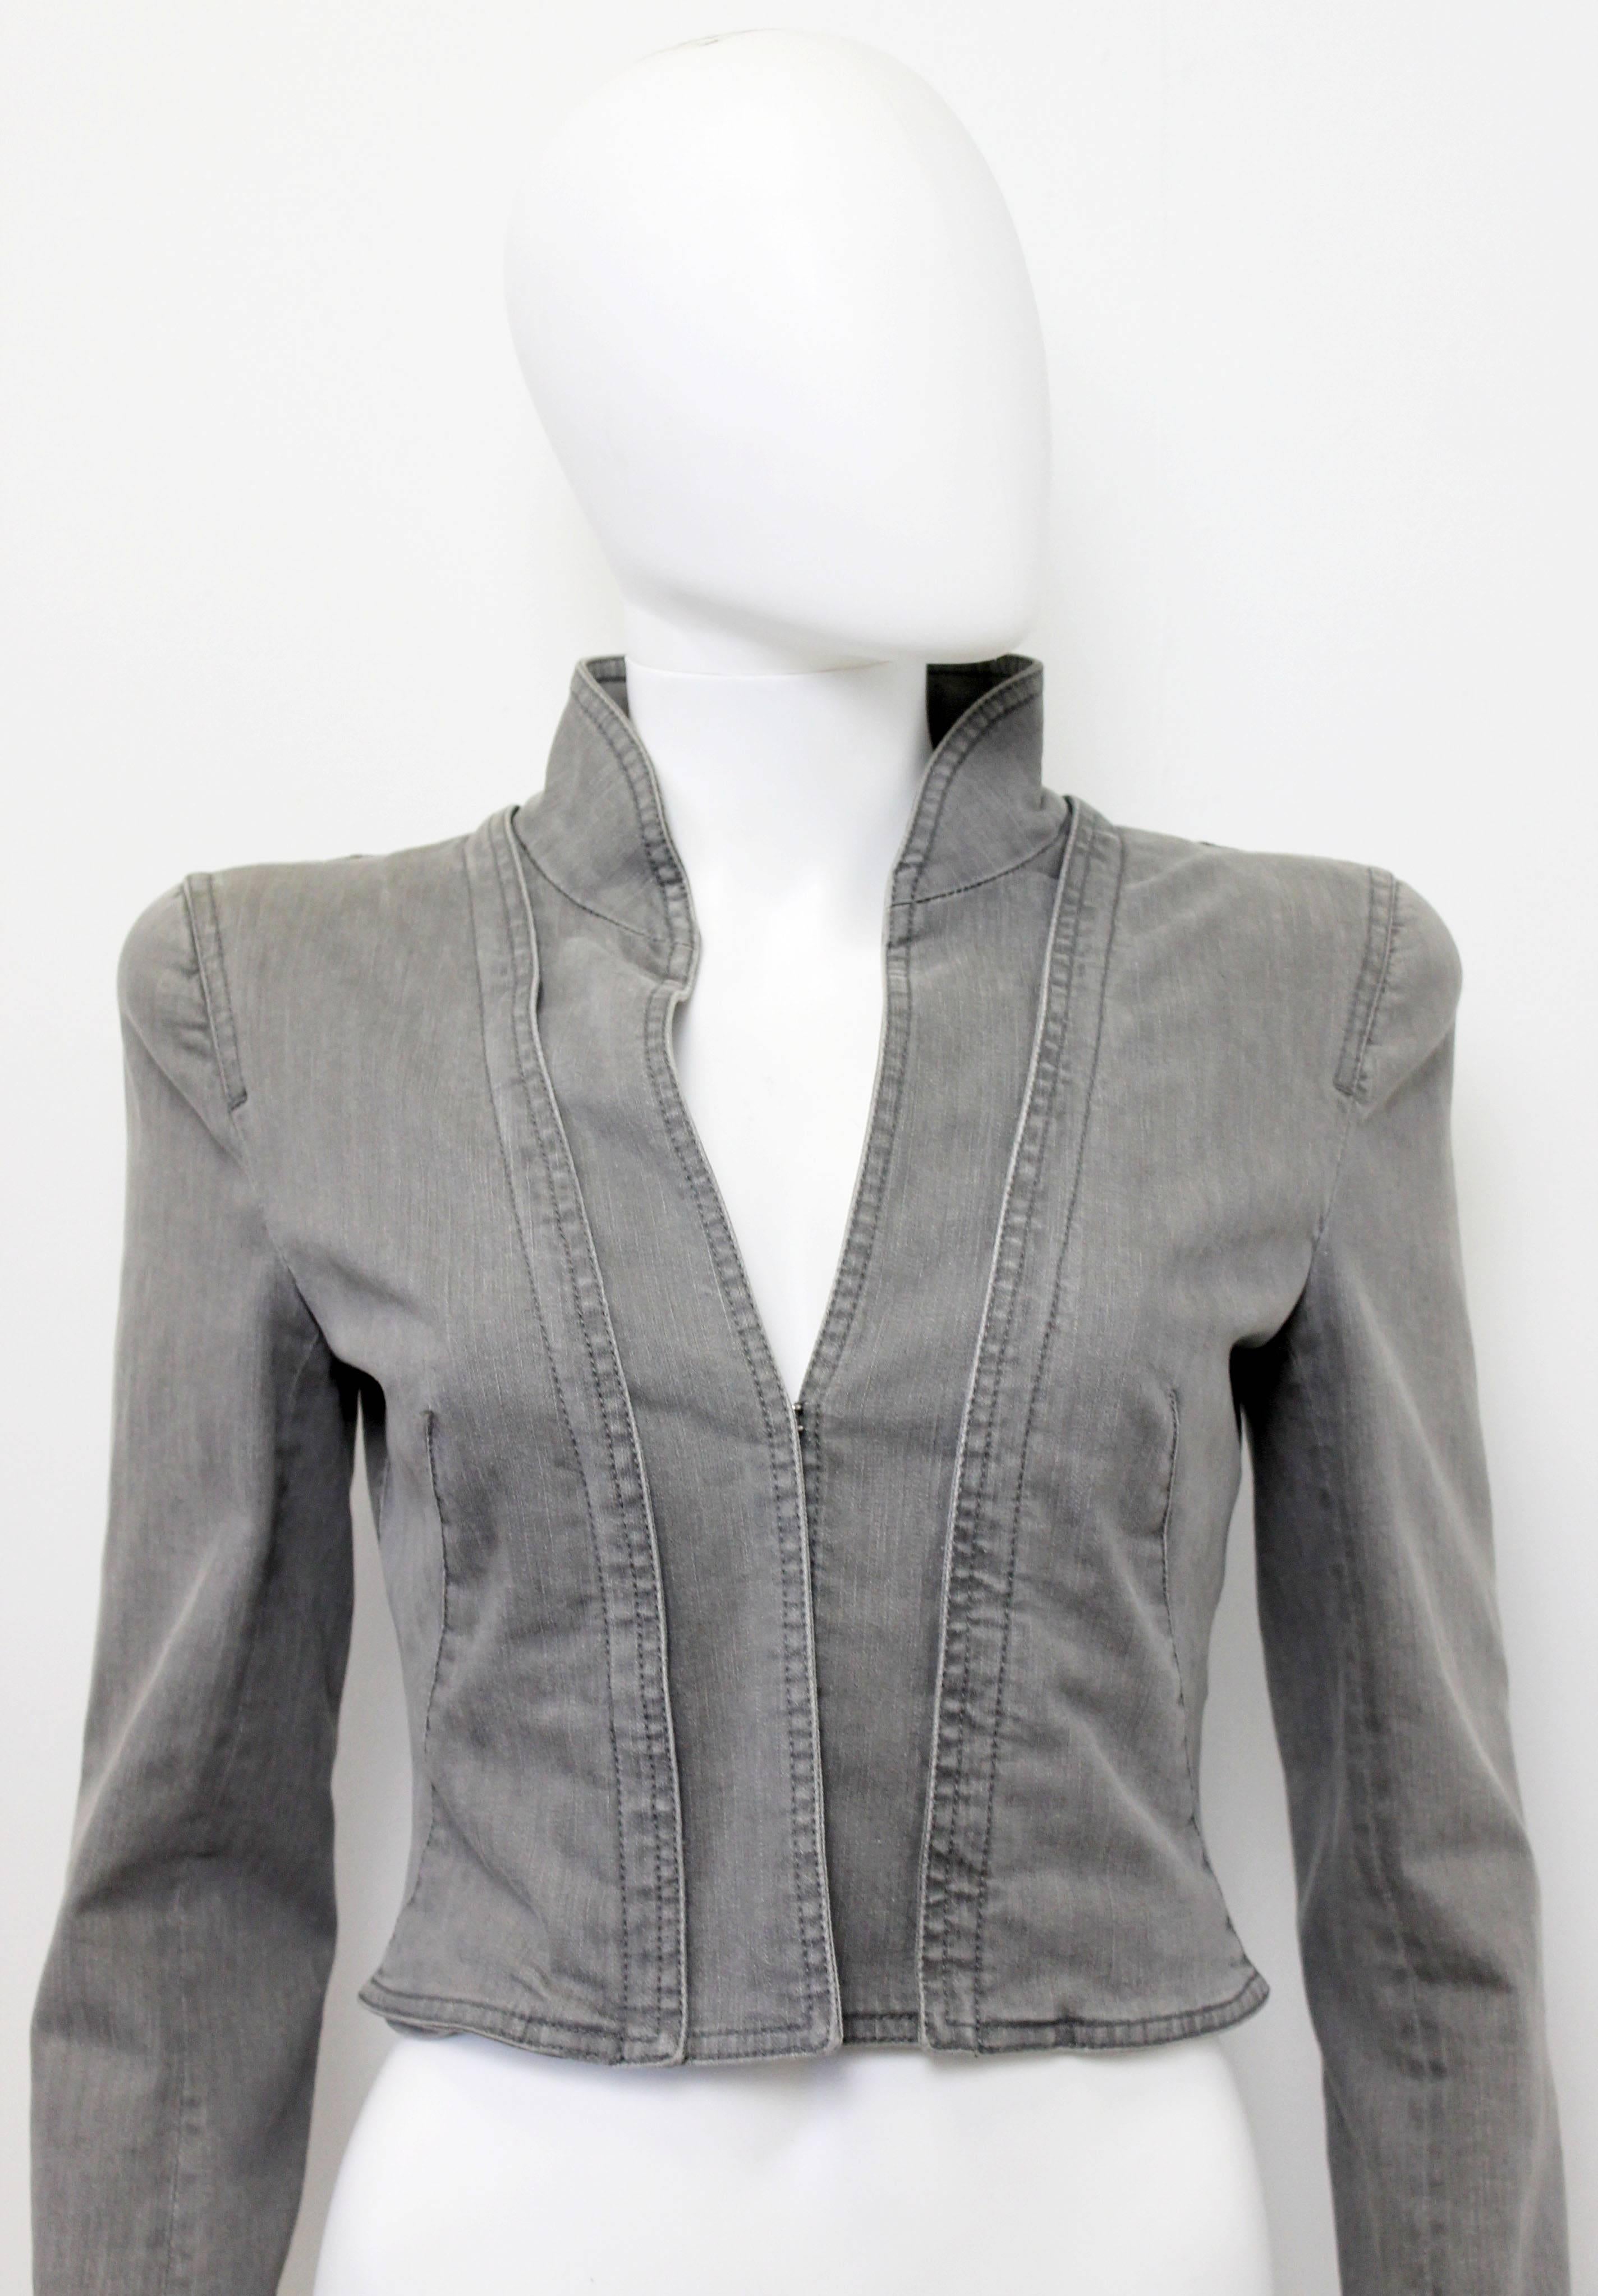 This jacket is a modern take on a riding jacket. The jacket is made from a washed out cotton denim and lined in a fine cotton blend fabric. The structured jacket also features a beautifully padded shoulder, hook and eye closure, unusual diagonal